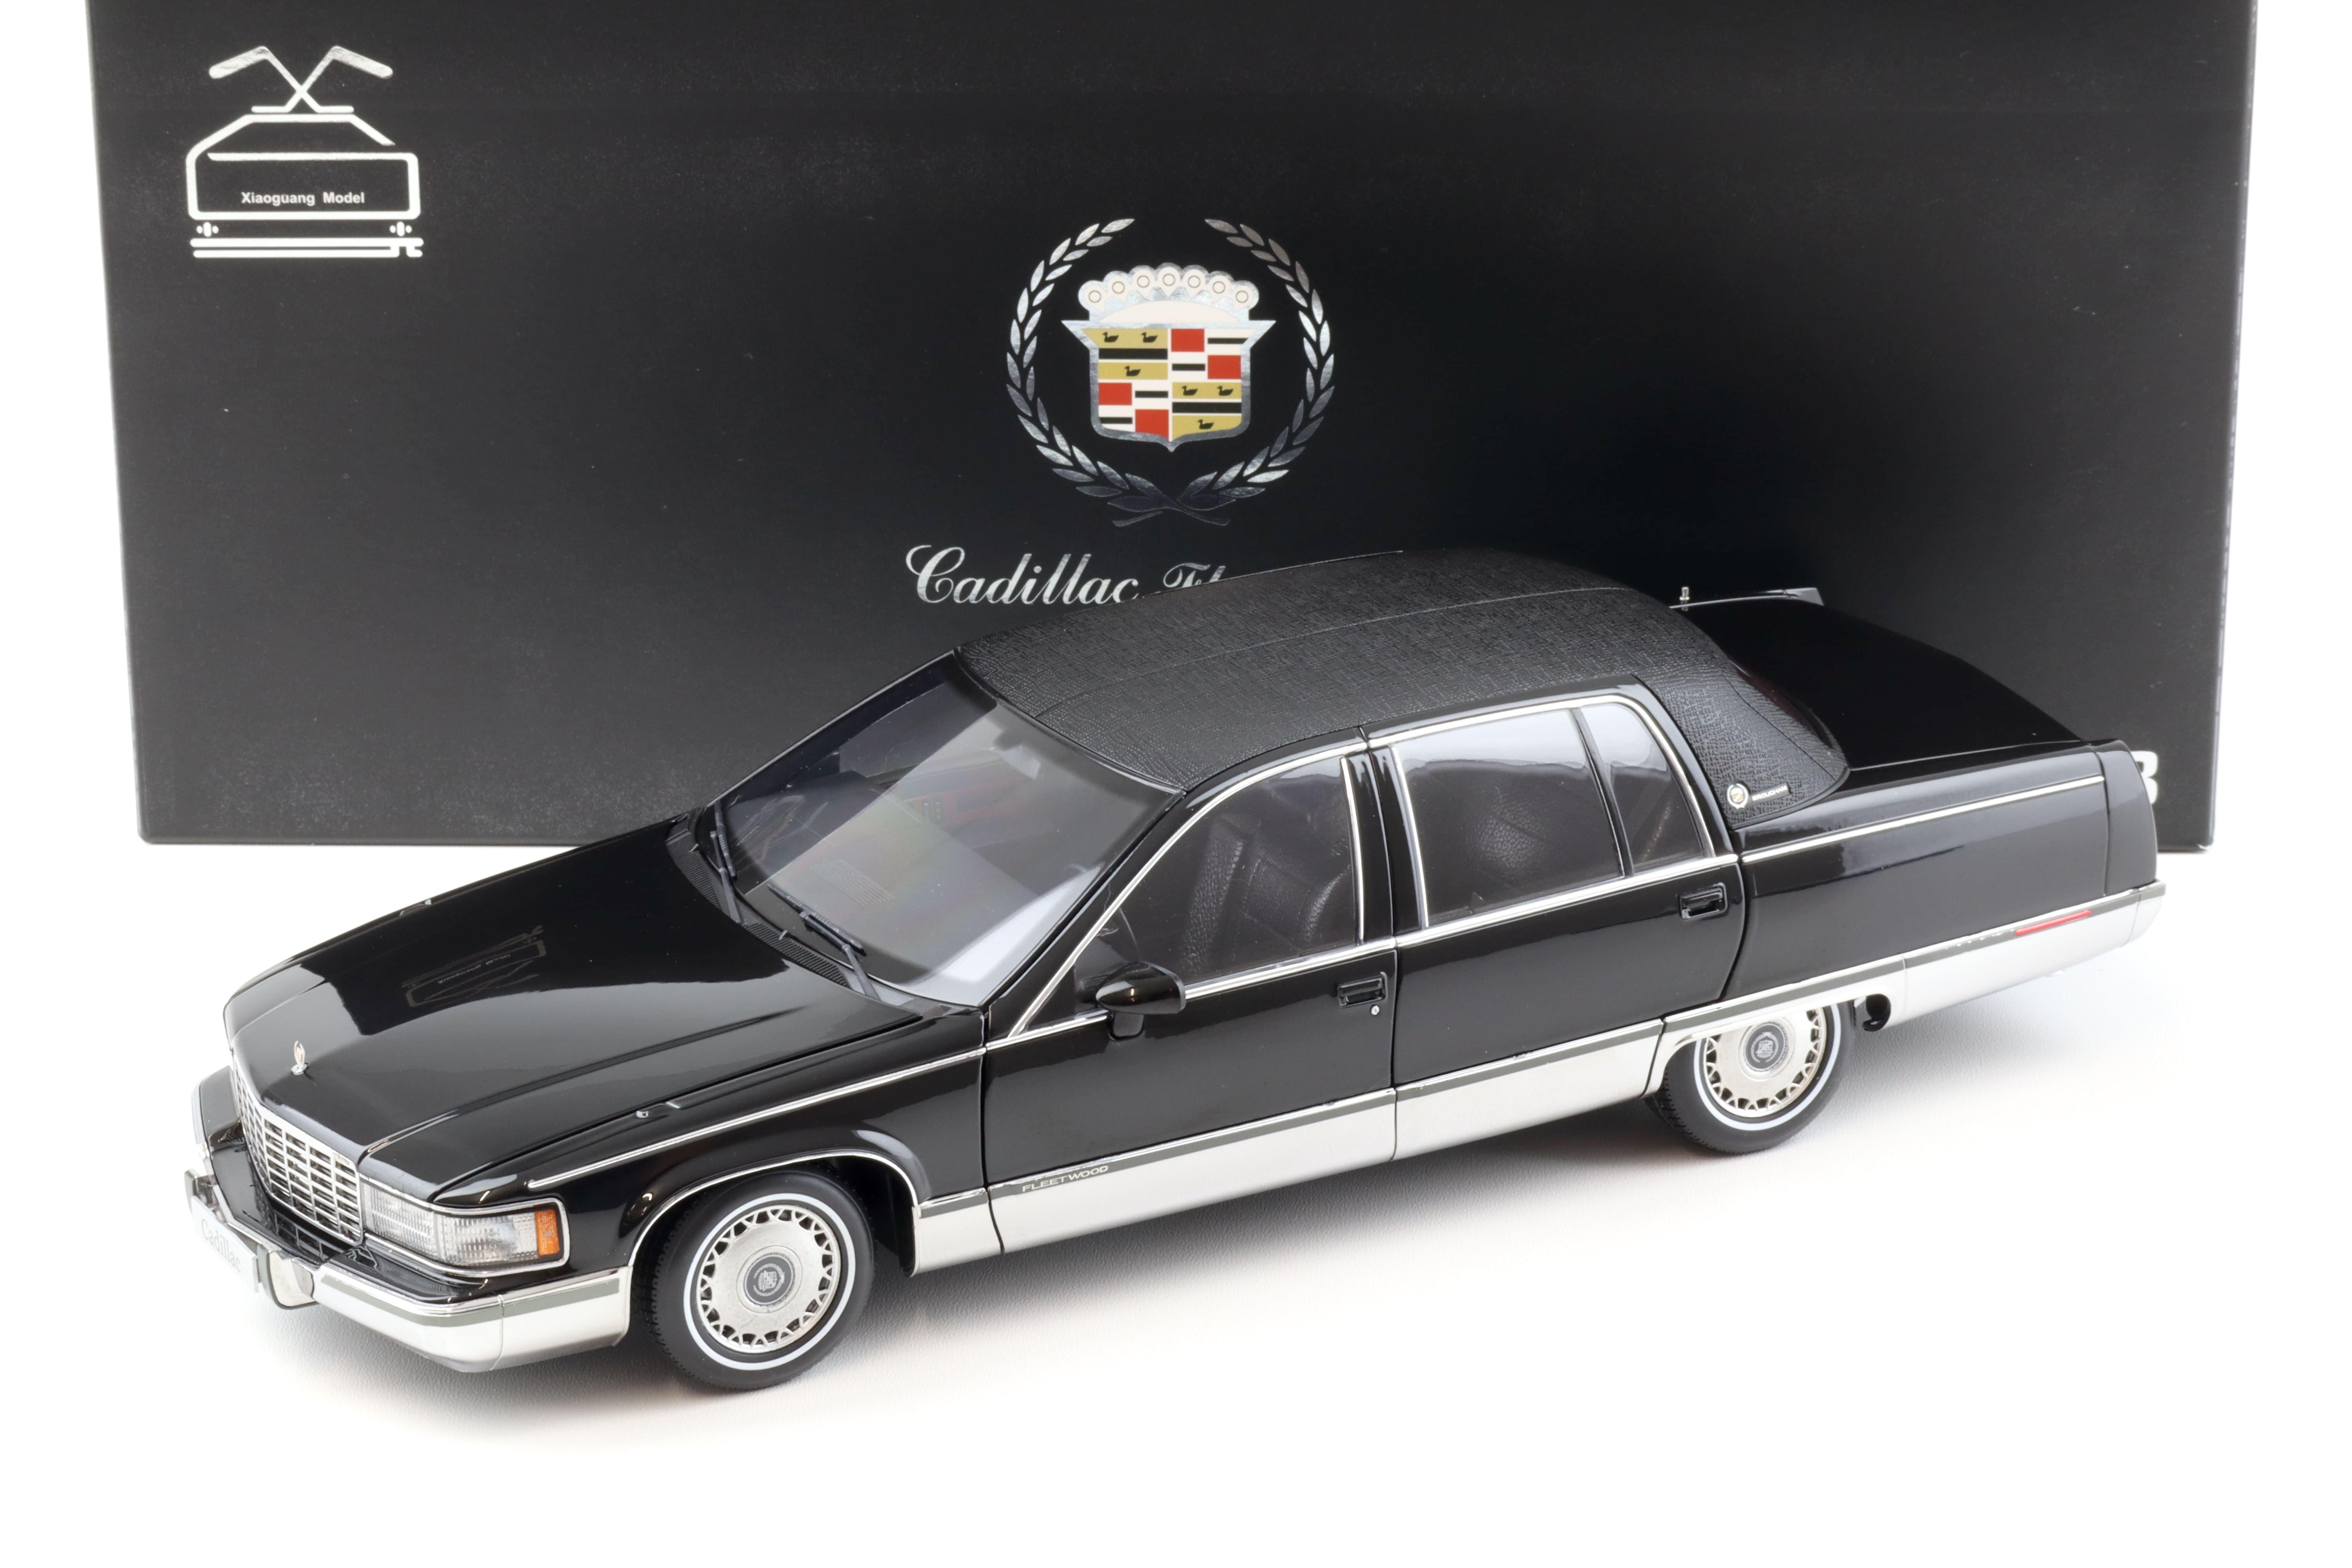 1:18 XiaoGuang Model 1993 Cadillac Fleetwood Brougham Limousine black- leather seats